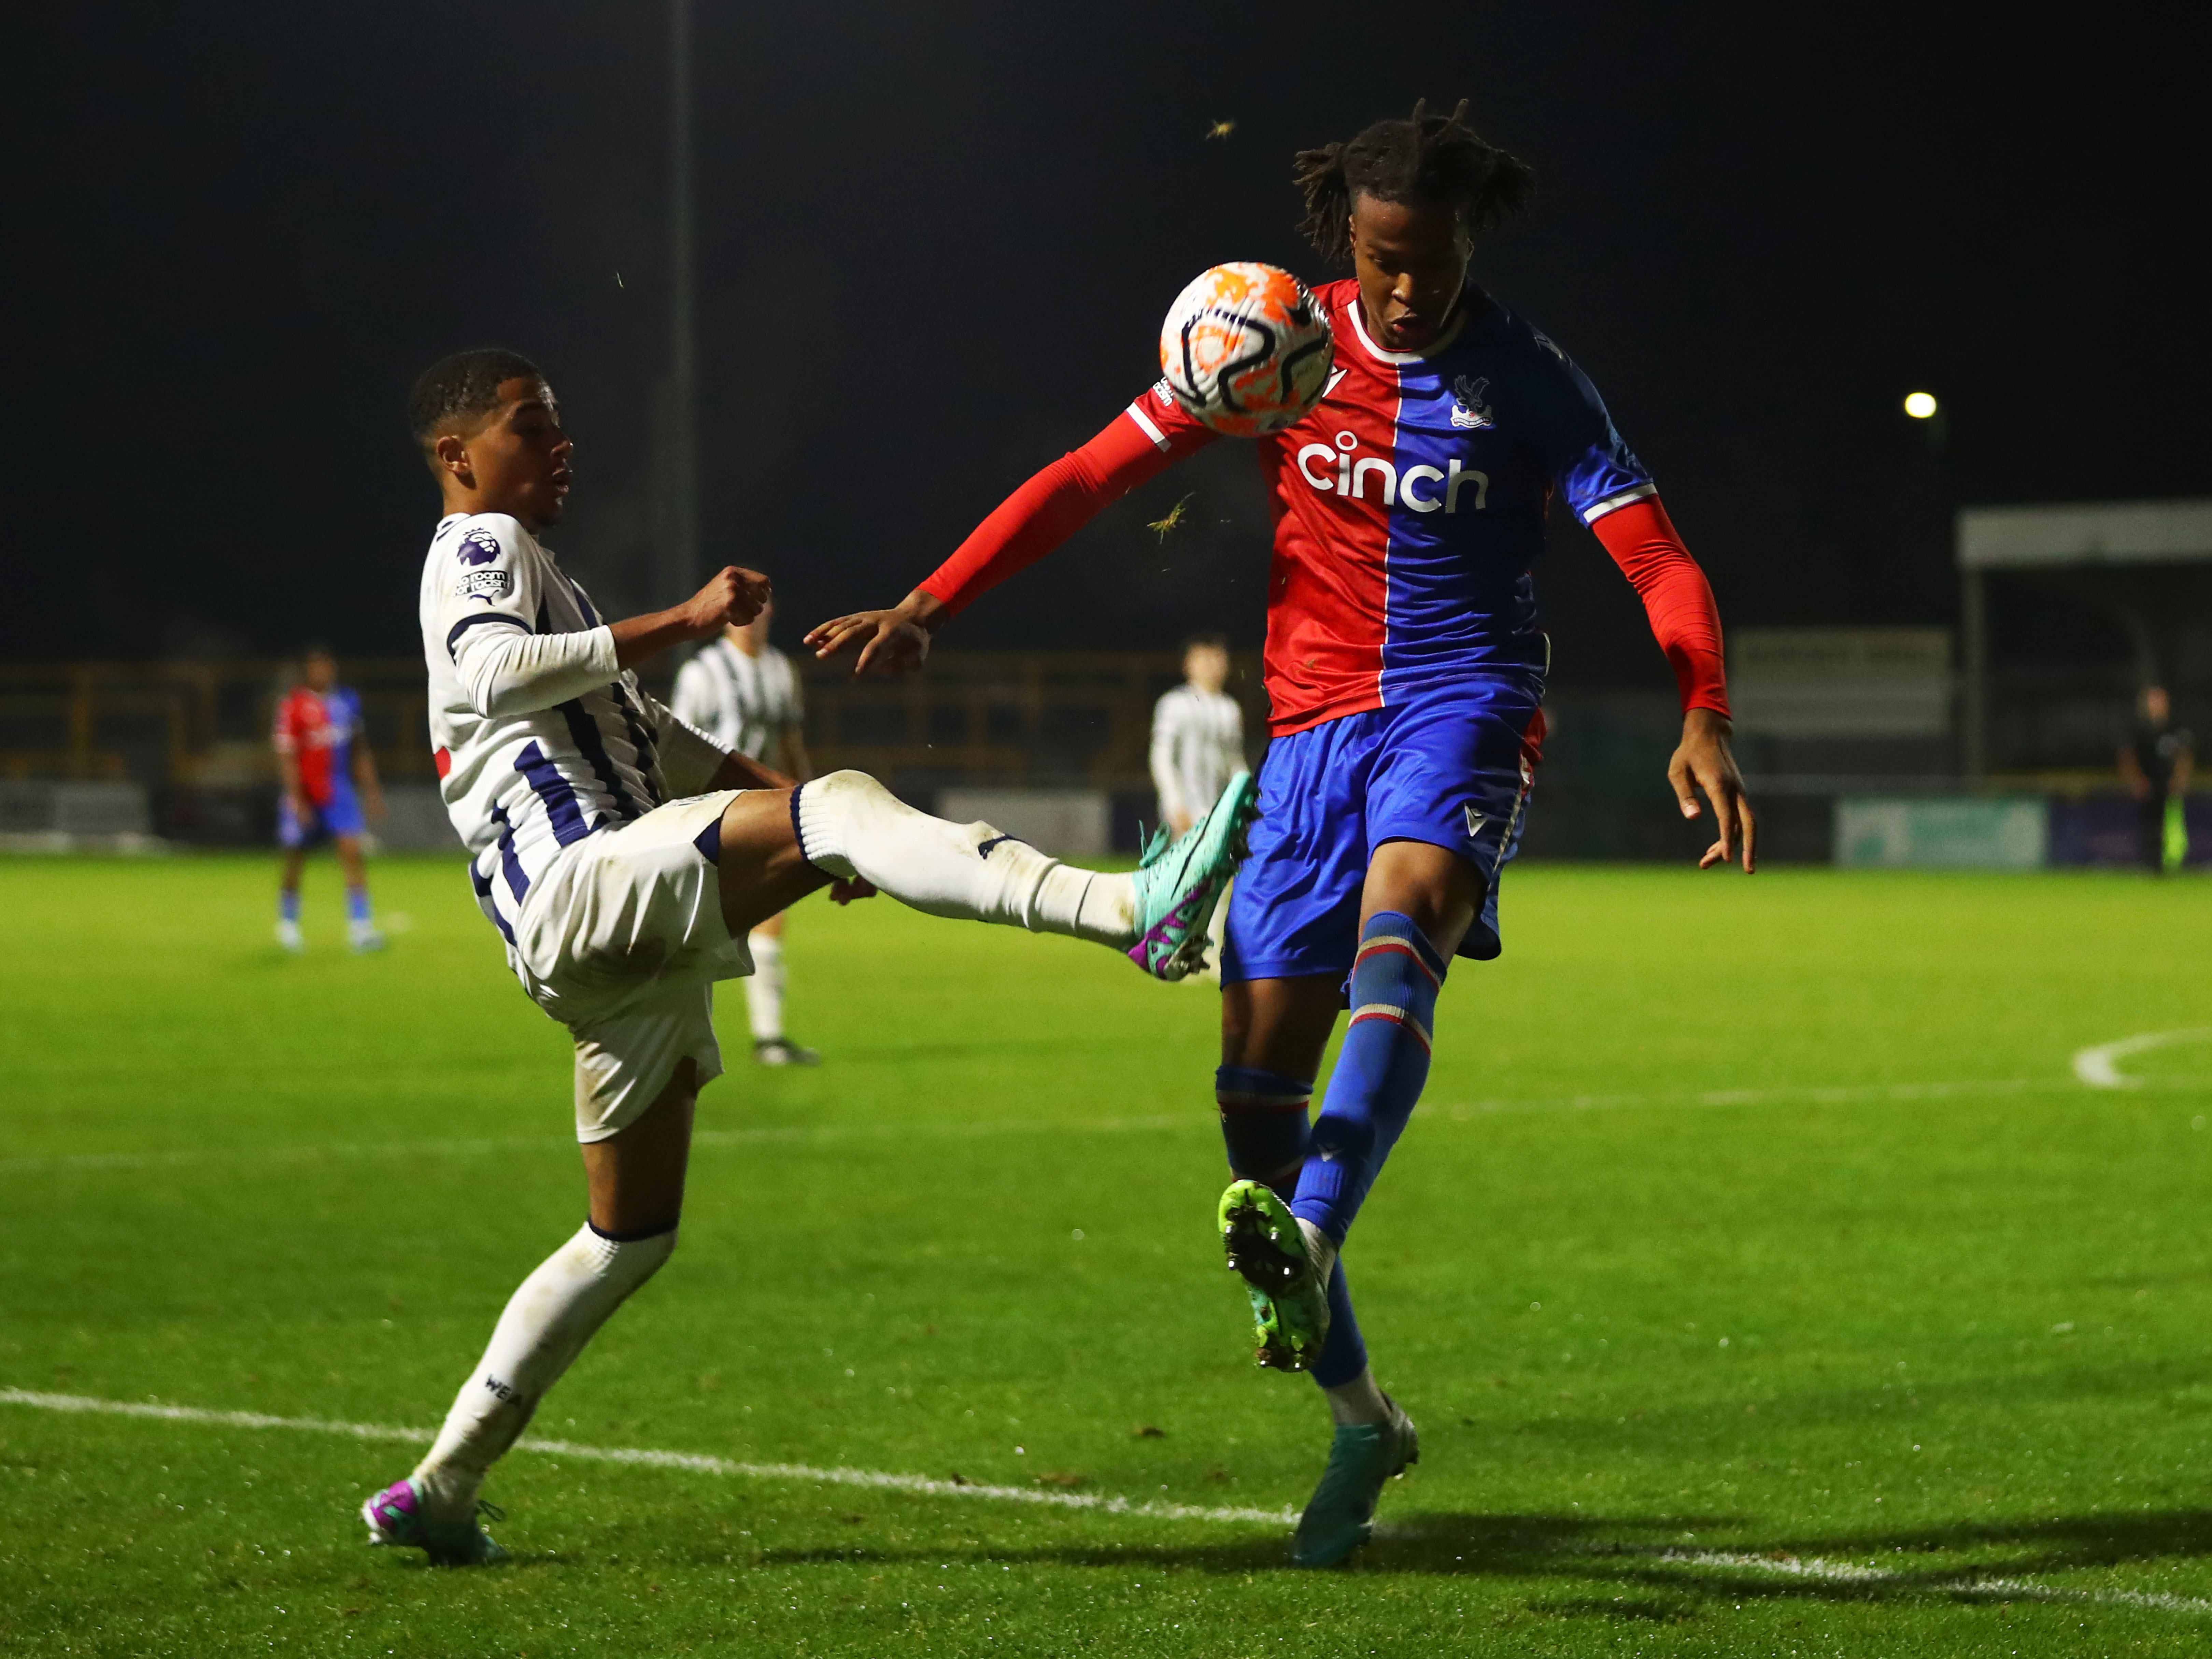 A photo of Albion U18s defender Deago Nelson, in the 2023/24 home colours, battling for the ball with a Crystal Palace player during a Premier League 2 game